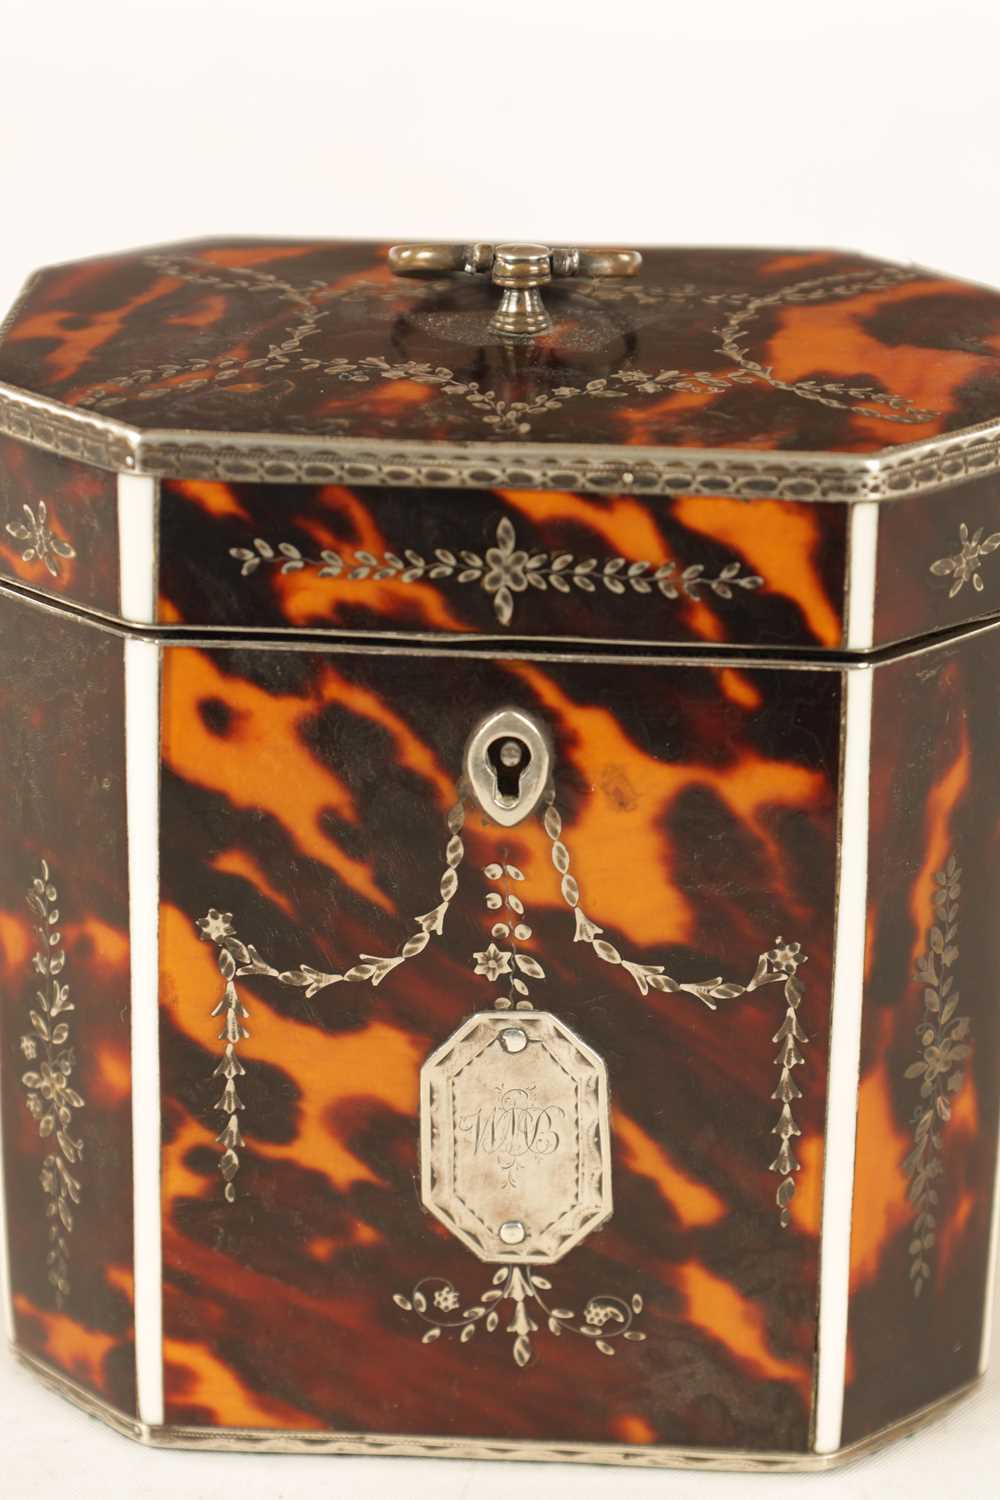 A FINE GEORGE III TORTOISHELL, IVORY AND SILVER MOUNTED FACETTED TEA CADDY - Image 5 of 12